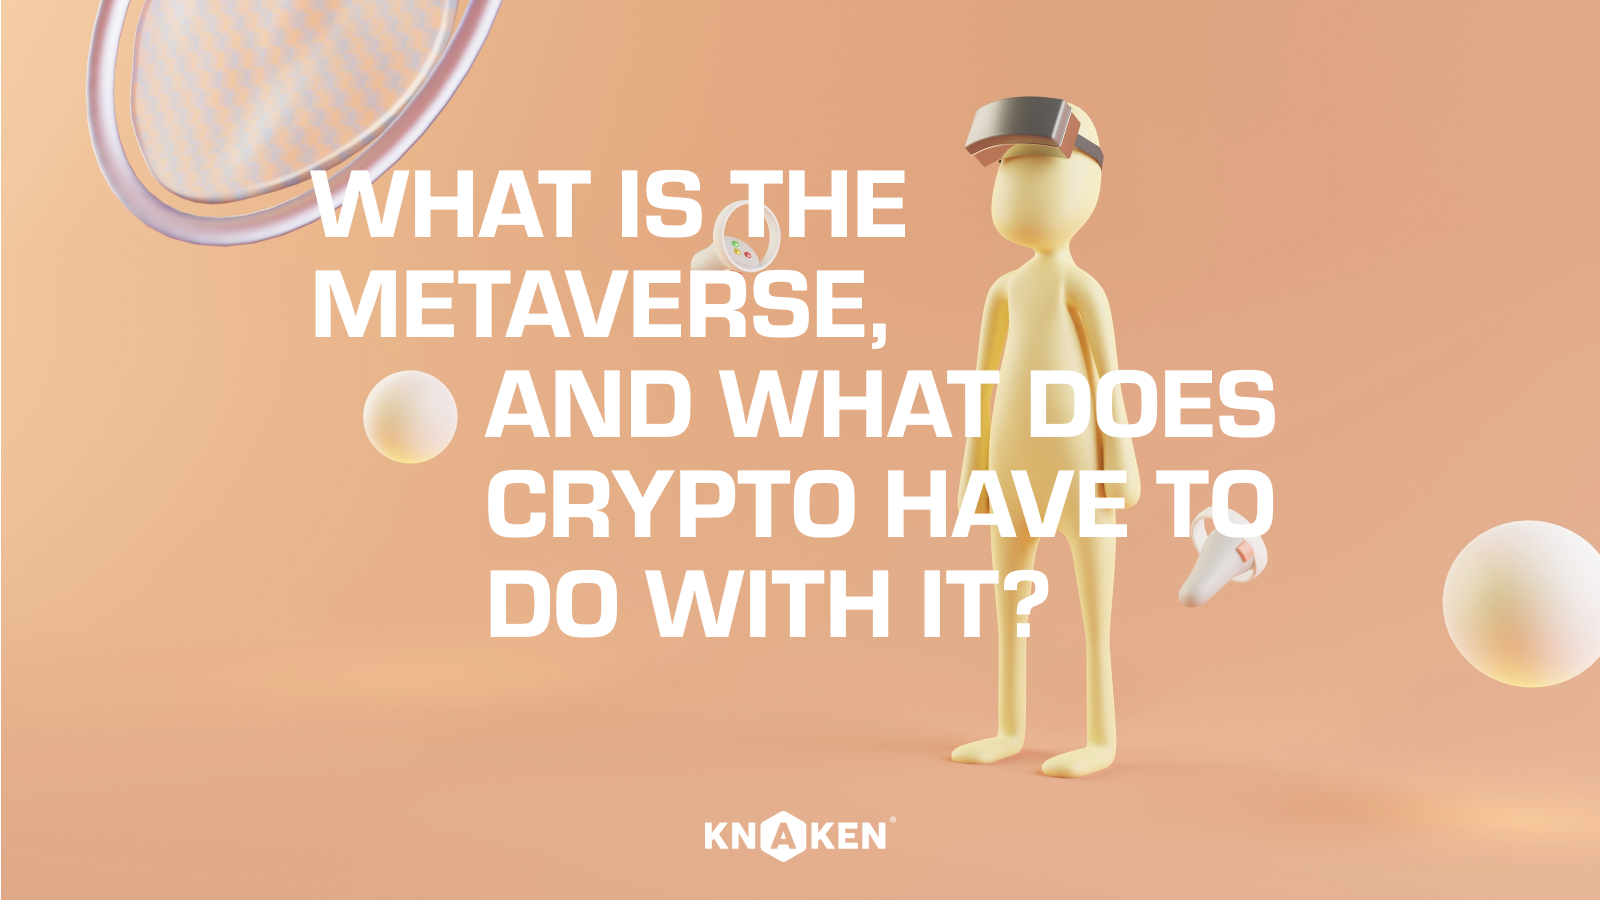 What is the metaverse, and what does crypto have to do with it?